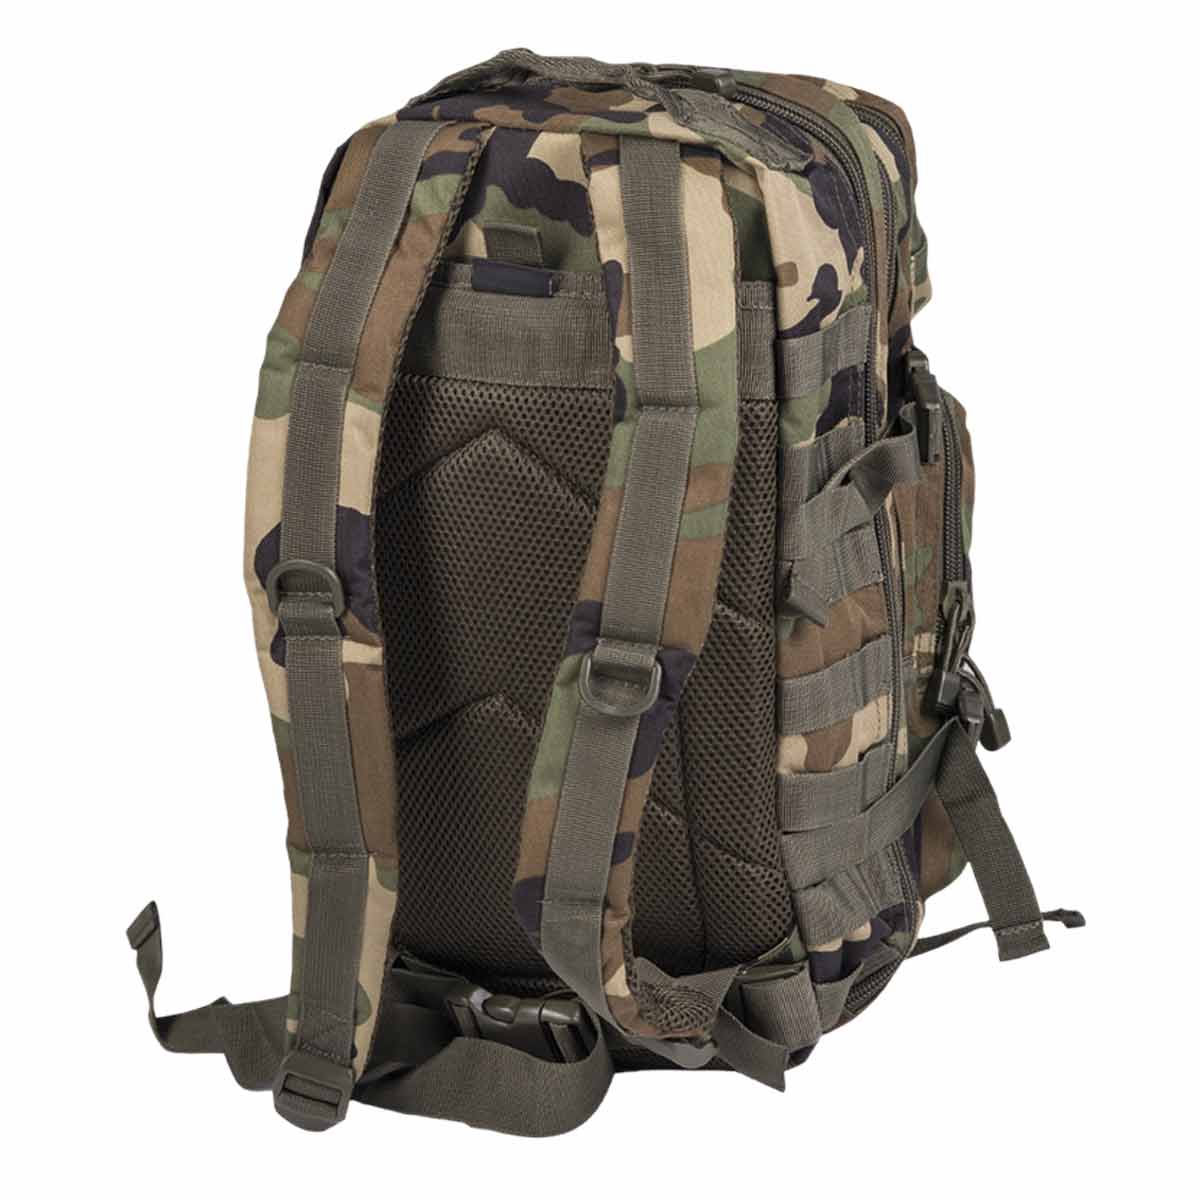 Mil-Tec MOLLE Assault Pack 20L Daysack Tactical Rucksack Military Army ...